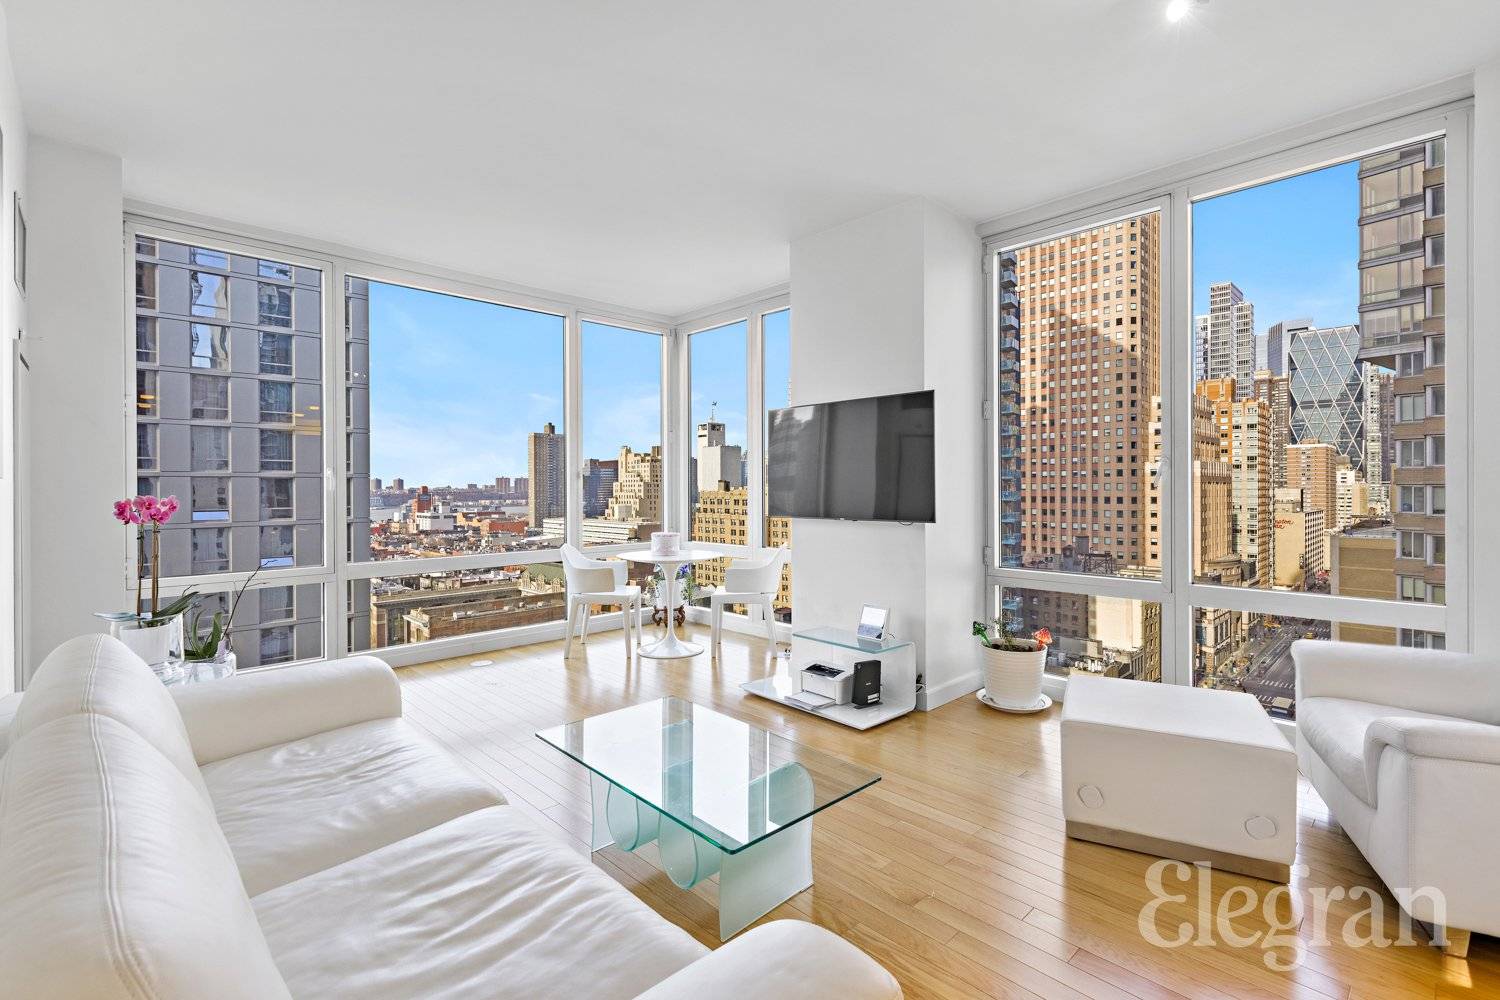 Exuding elegance and style, this breathtaking apartment offers the life of luxury you deserve.